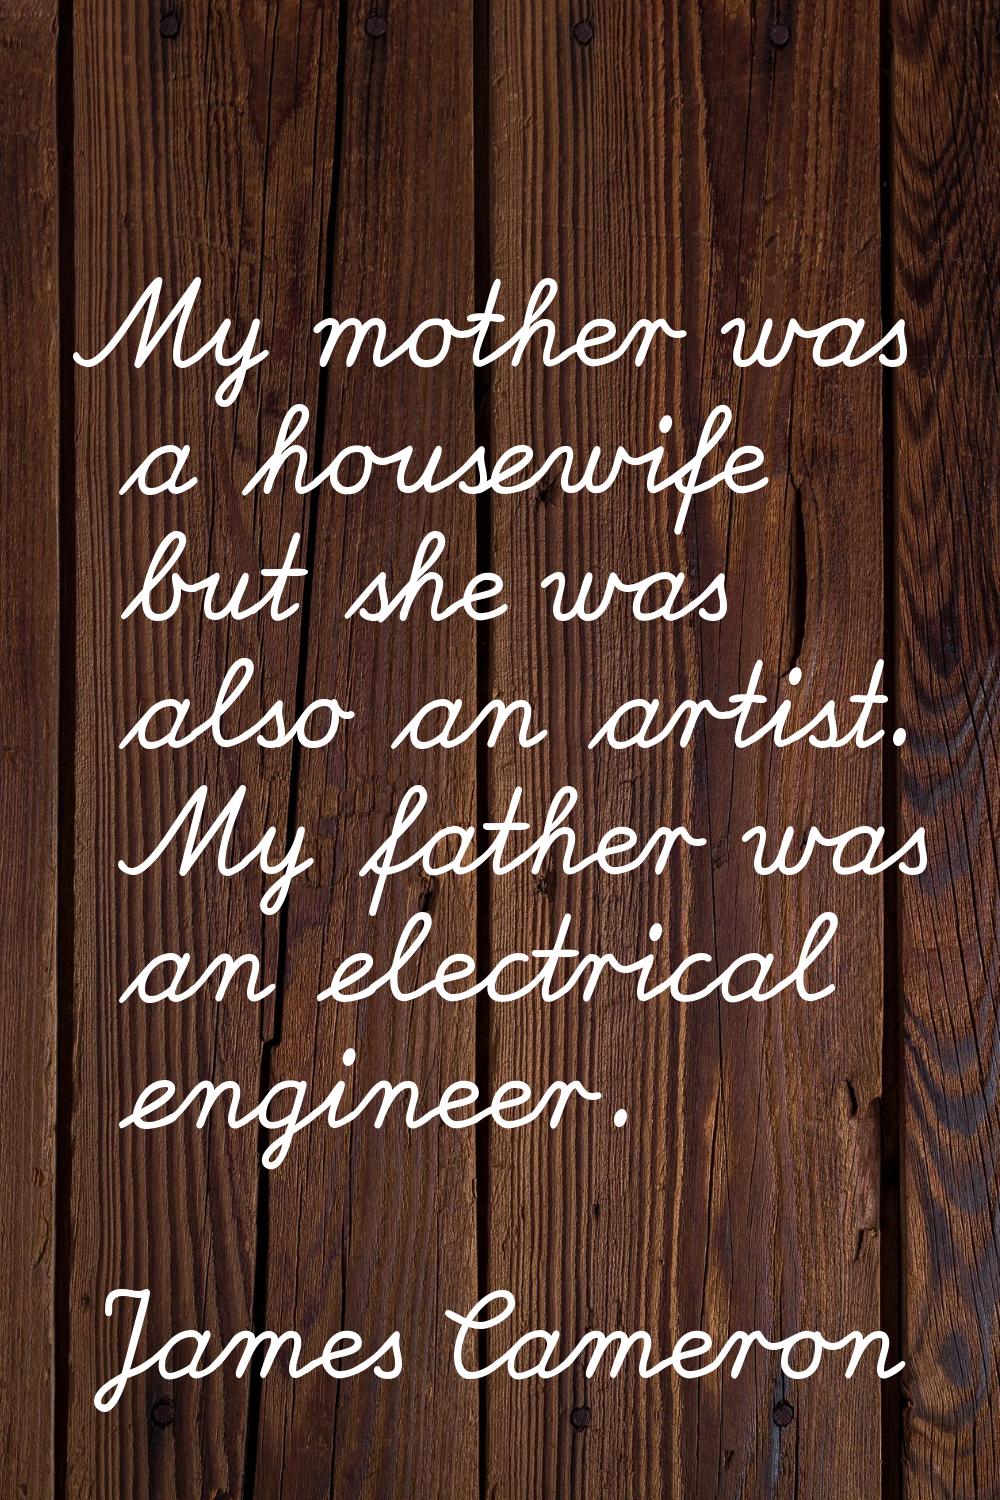 My mother was a housewife but she was also an artist. My father was an electrical engineer.